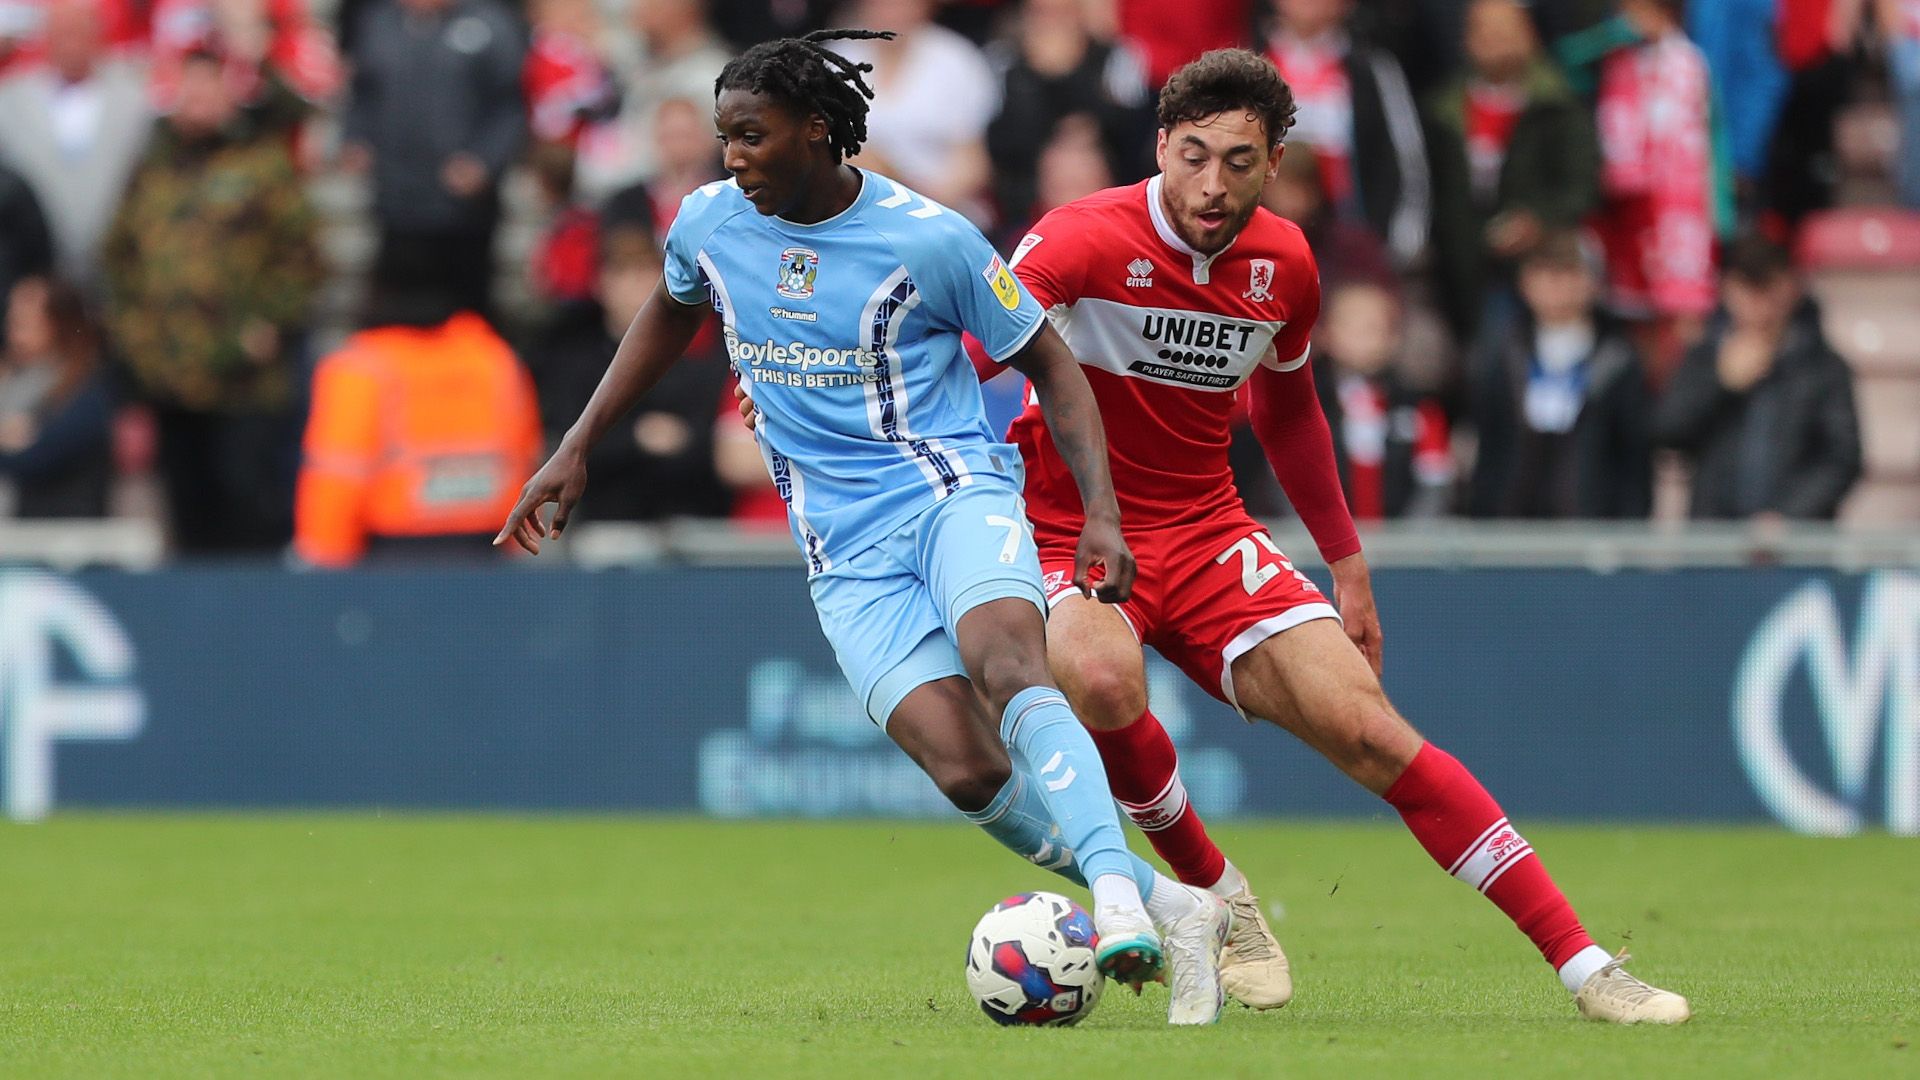 Coventry vs Middlesbrough live stream how to watch the playoff semi